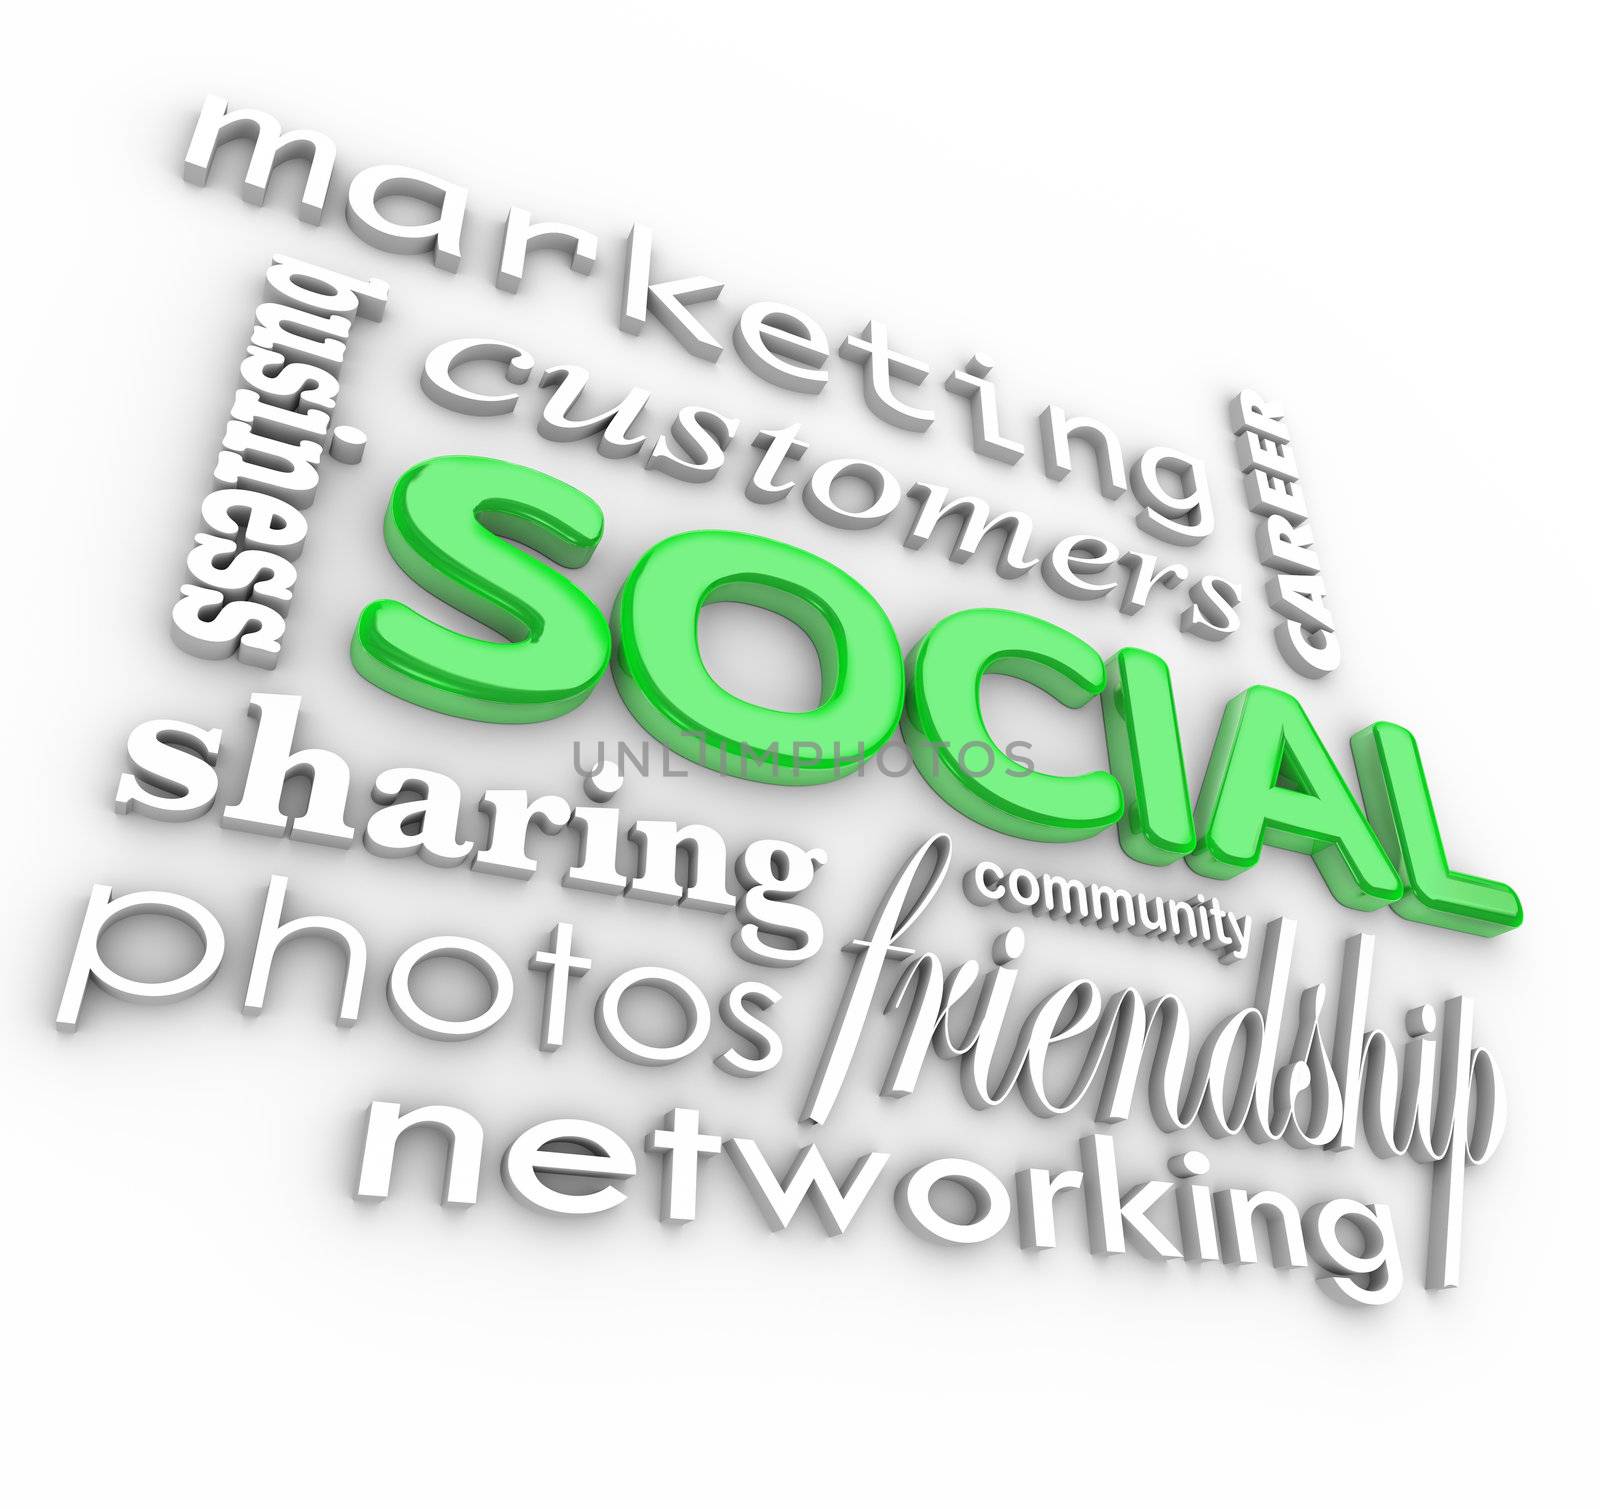 The word Social and related terms in 3D such as customers, friendship, community, networking, marketing, business, photos, sharing and career